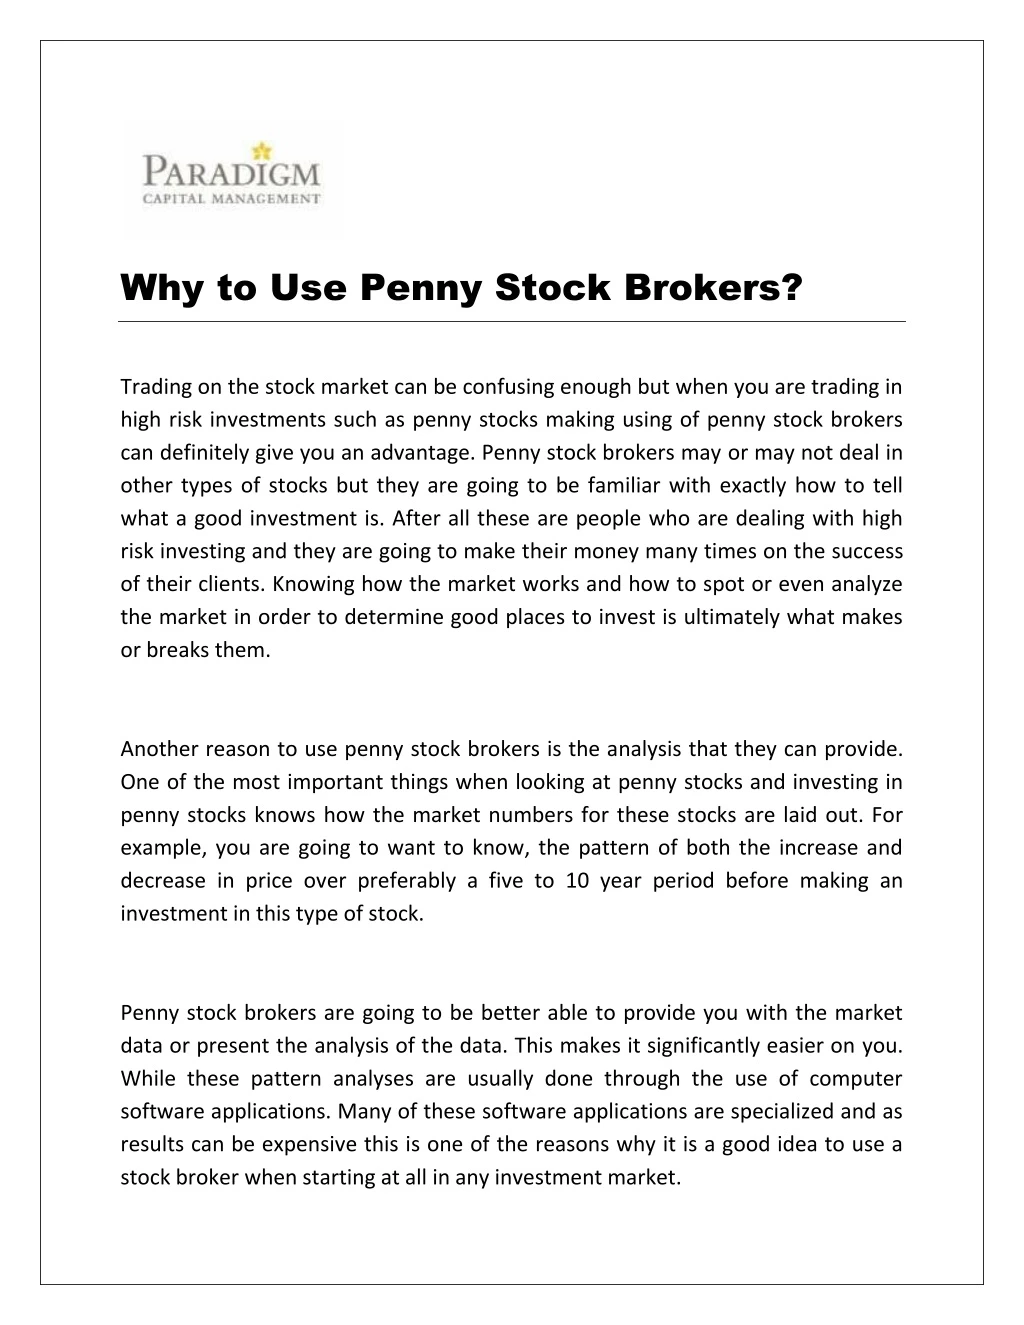 why to use penny stock brokers